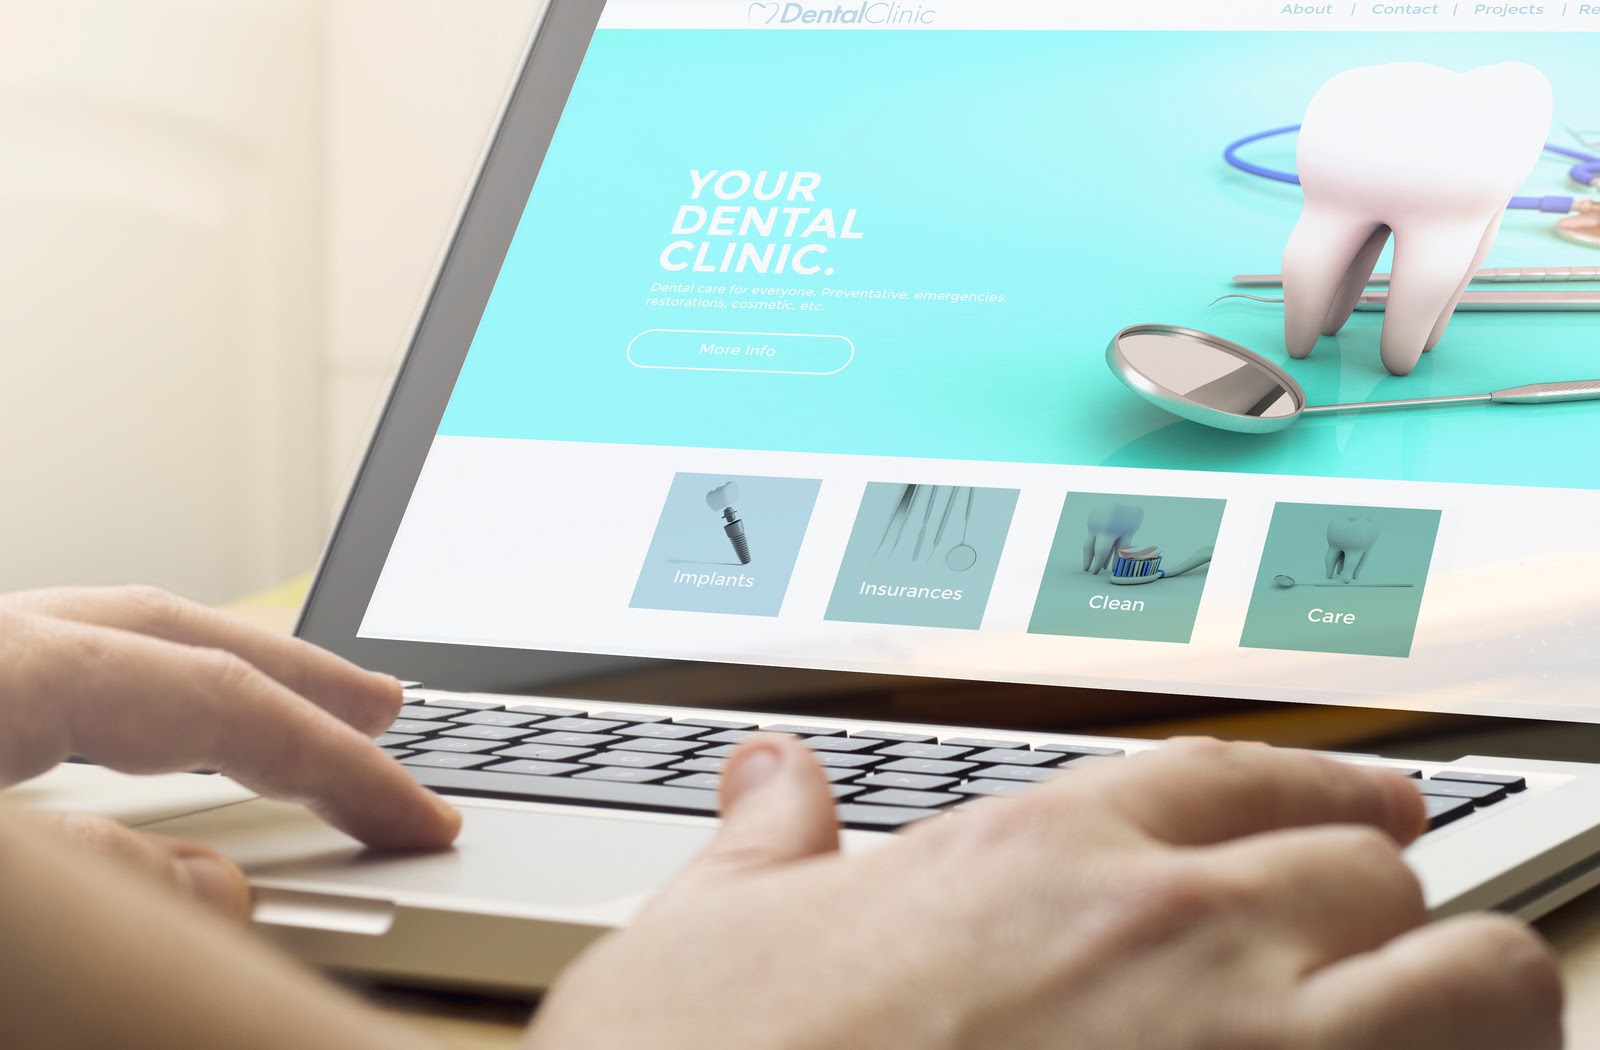 Dental professional working on their website